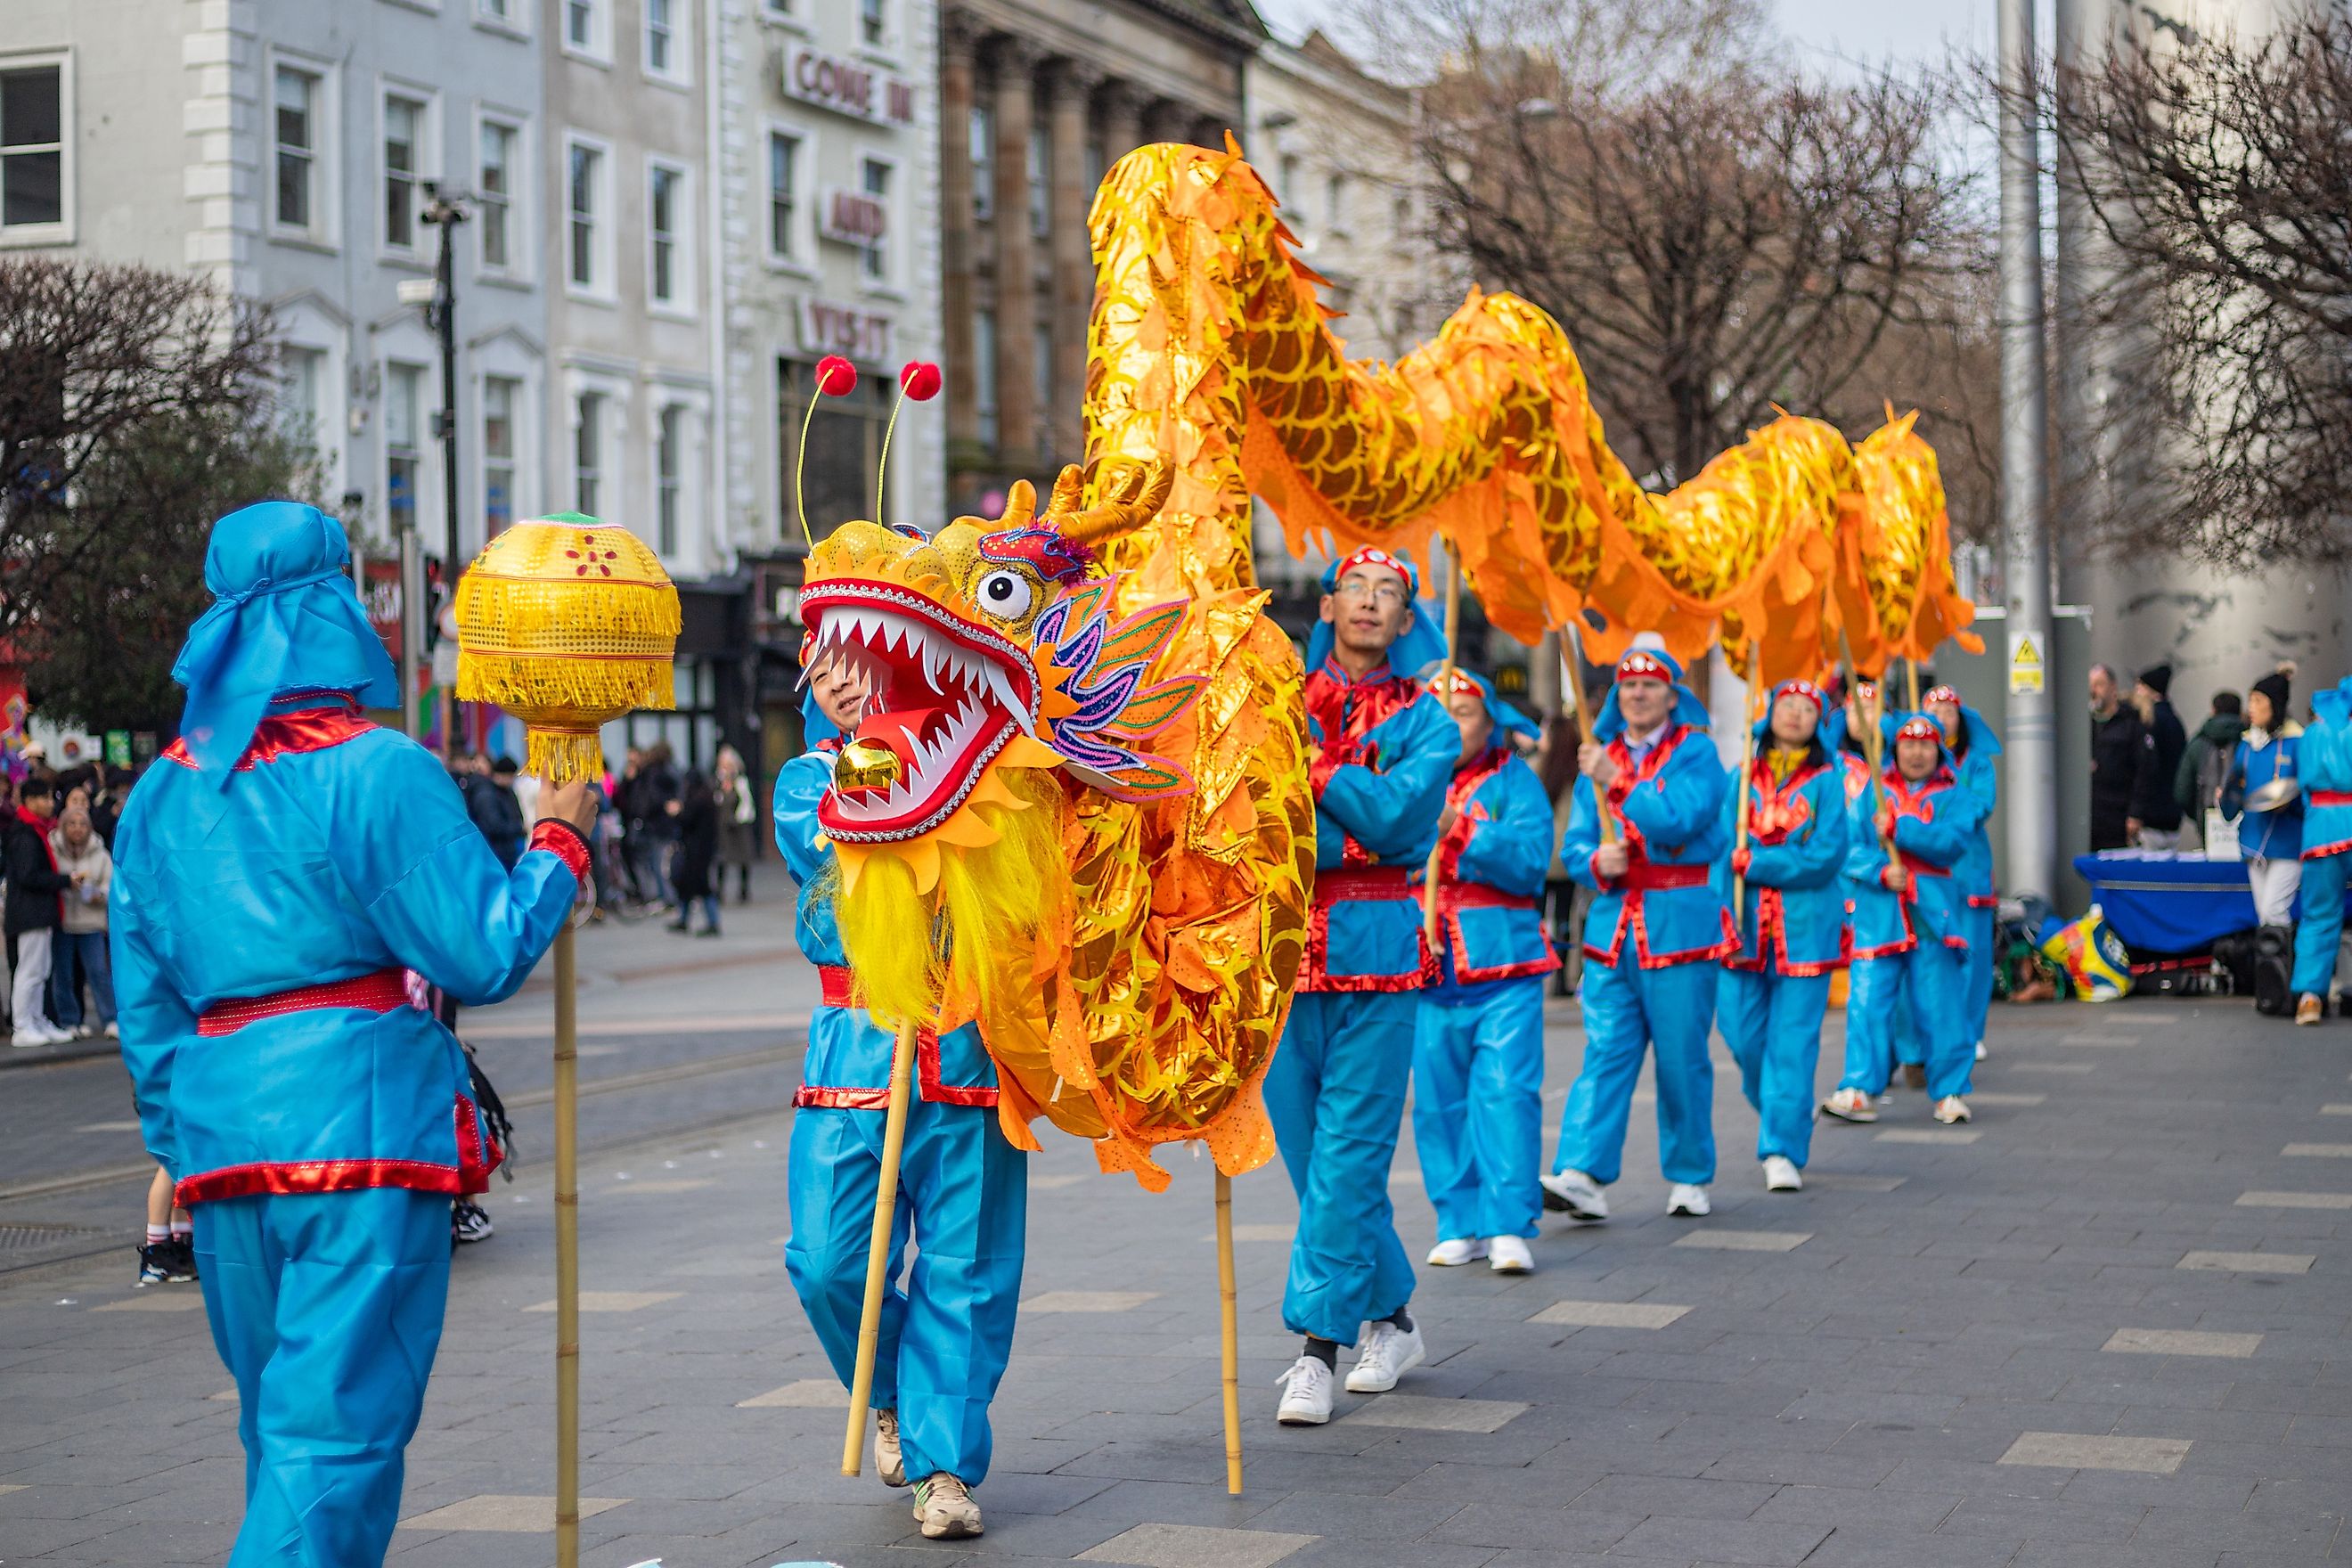 Falun Gong practitioners perform a dragon dance on O'Connell Street to celebrate the Lunar New Year. Image by LiamMurphyPics via Shutterstock.com